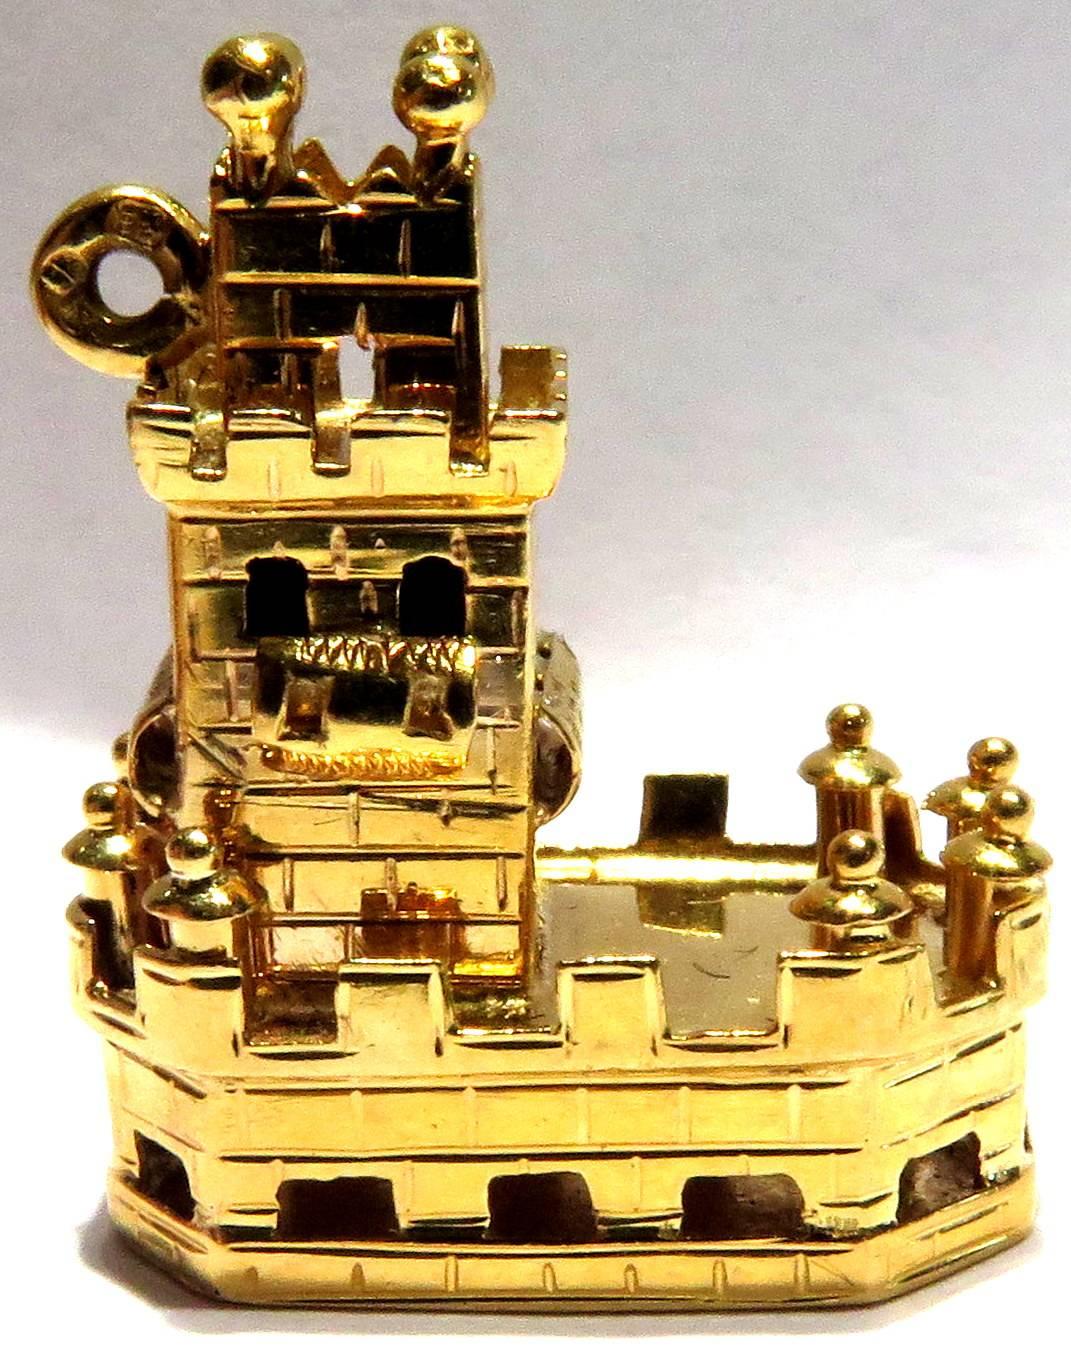 This incredible charm is from Lisbon Portugal. It is 19.2 carat gold, which is what they use to make their jewelry.  This Tower of St Vincent, or as they call it, Torre de Belem, is located in Lisbon. This is an incredibly well detailed and very